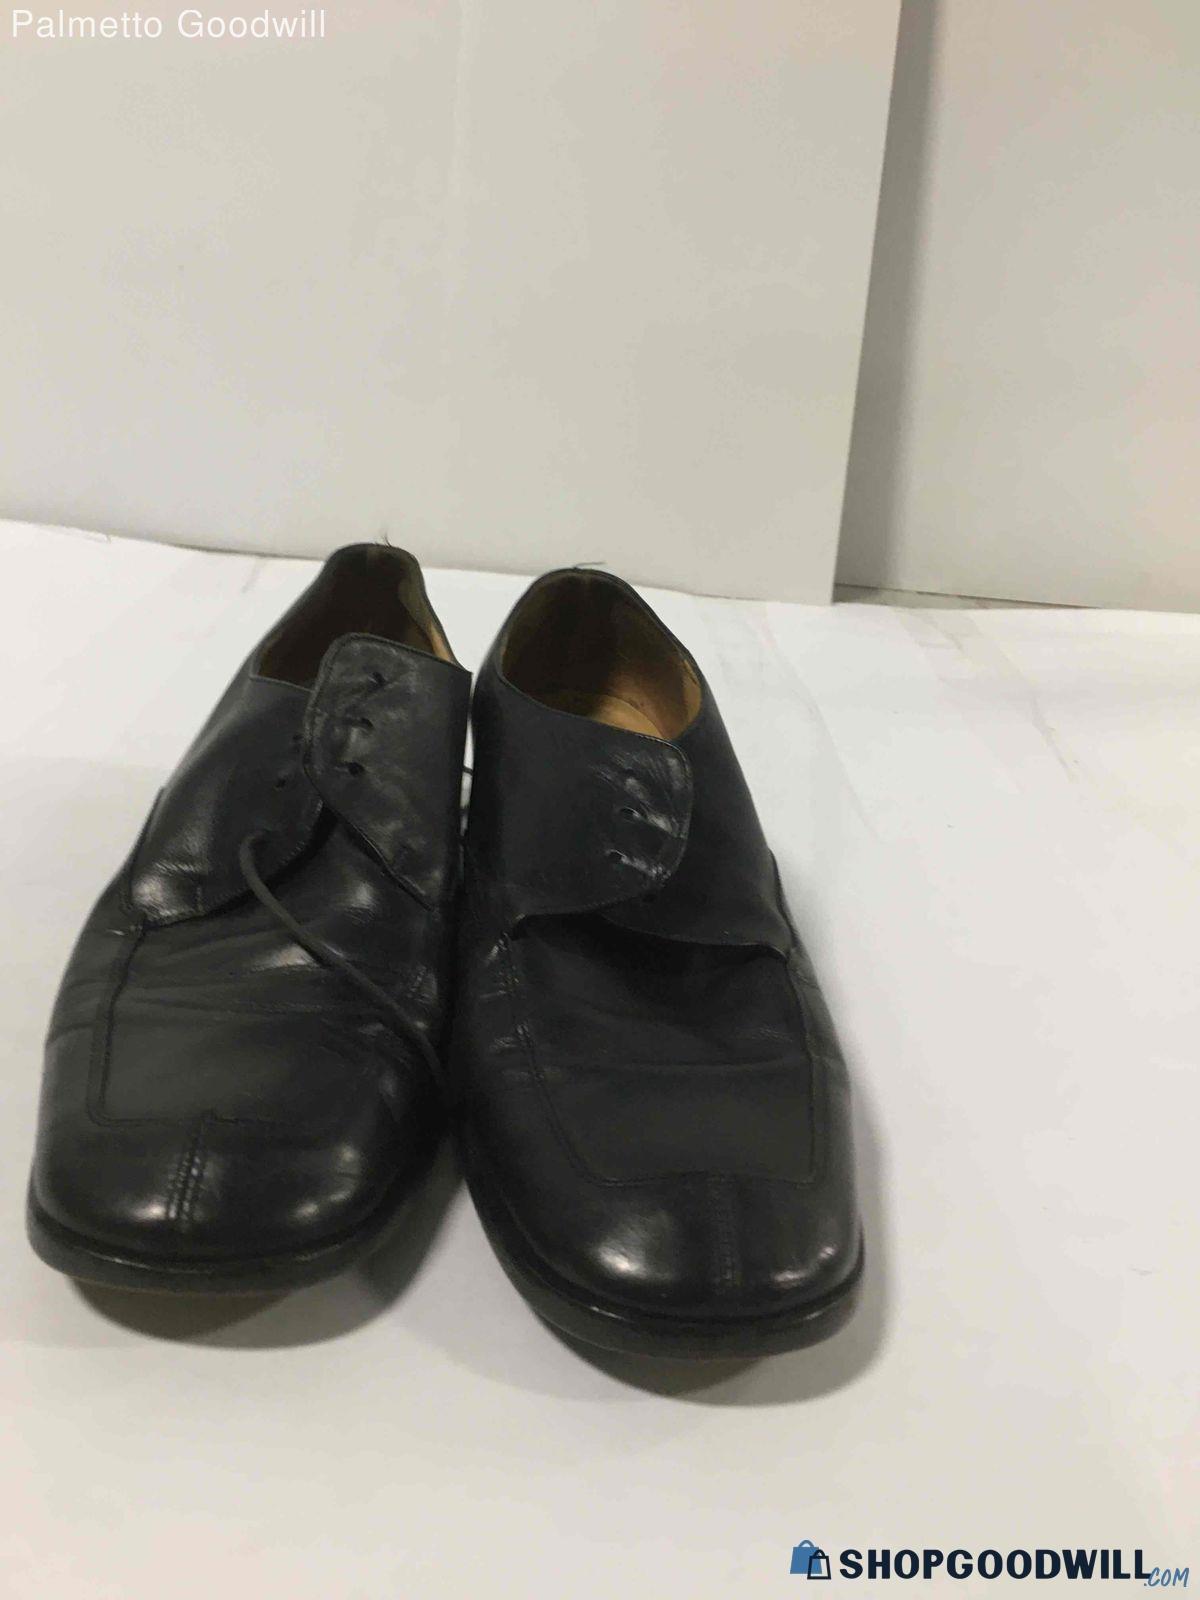 Ladies Blk Coach Dress Shoes Size 9.5 Pre-Owned - shopgoodwill.com